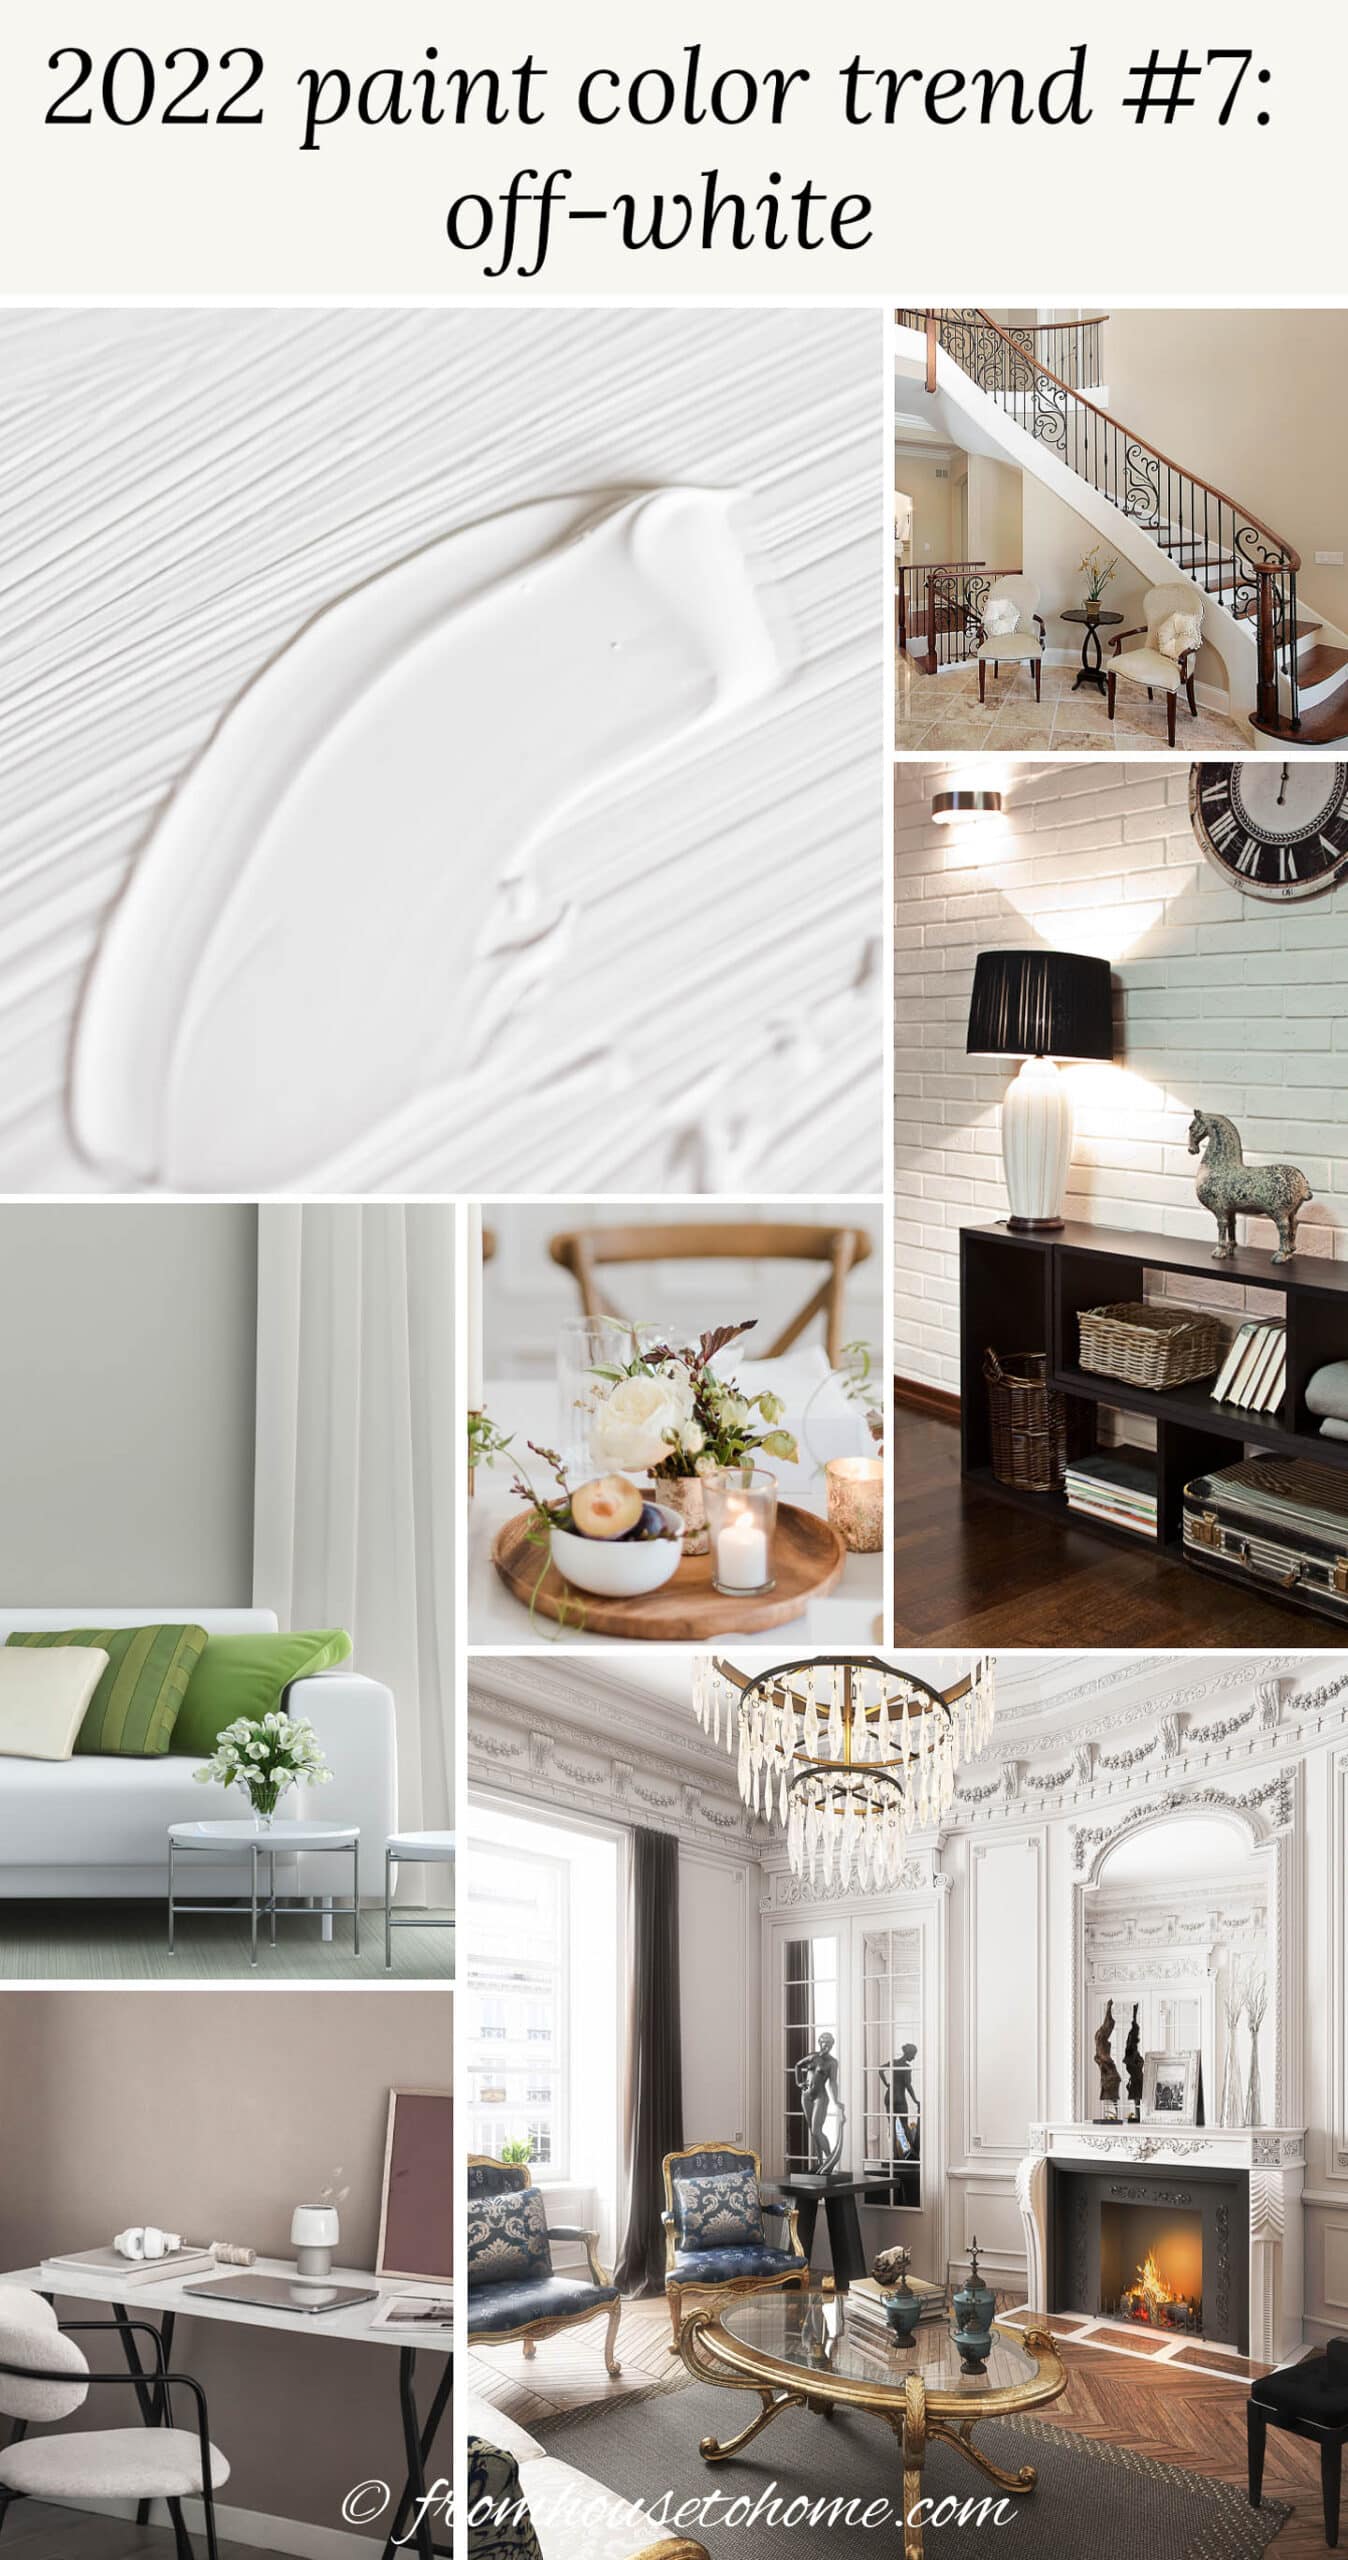 off white colors including a paint swatch, a hallway with off white paint, an entrance with bricks that are painted off white, off white flowers and candles on a table, a living room with an off white sofa, curtains and walls, an office with off white furniture and beige walls, and a living room with walls and fireplace painted in off white